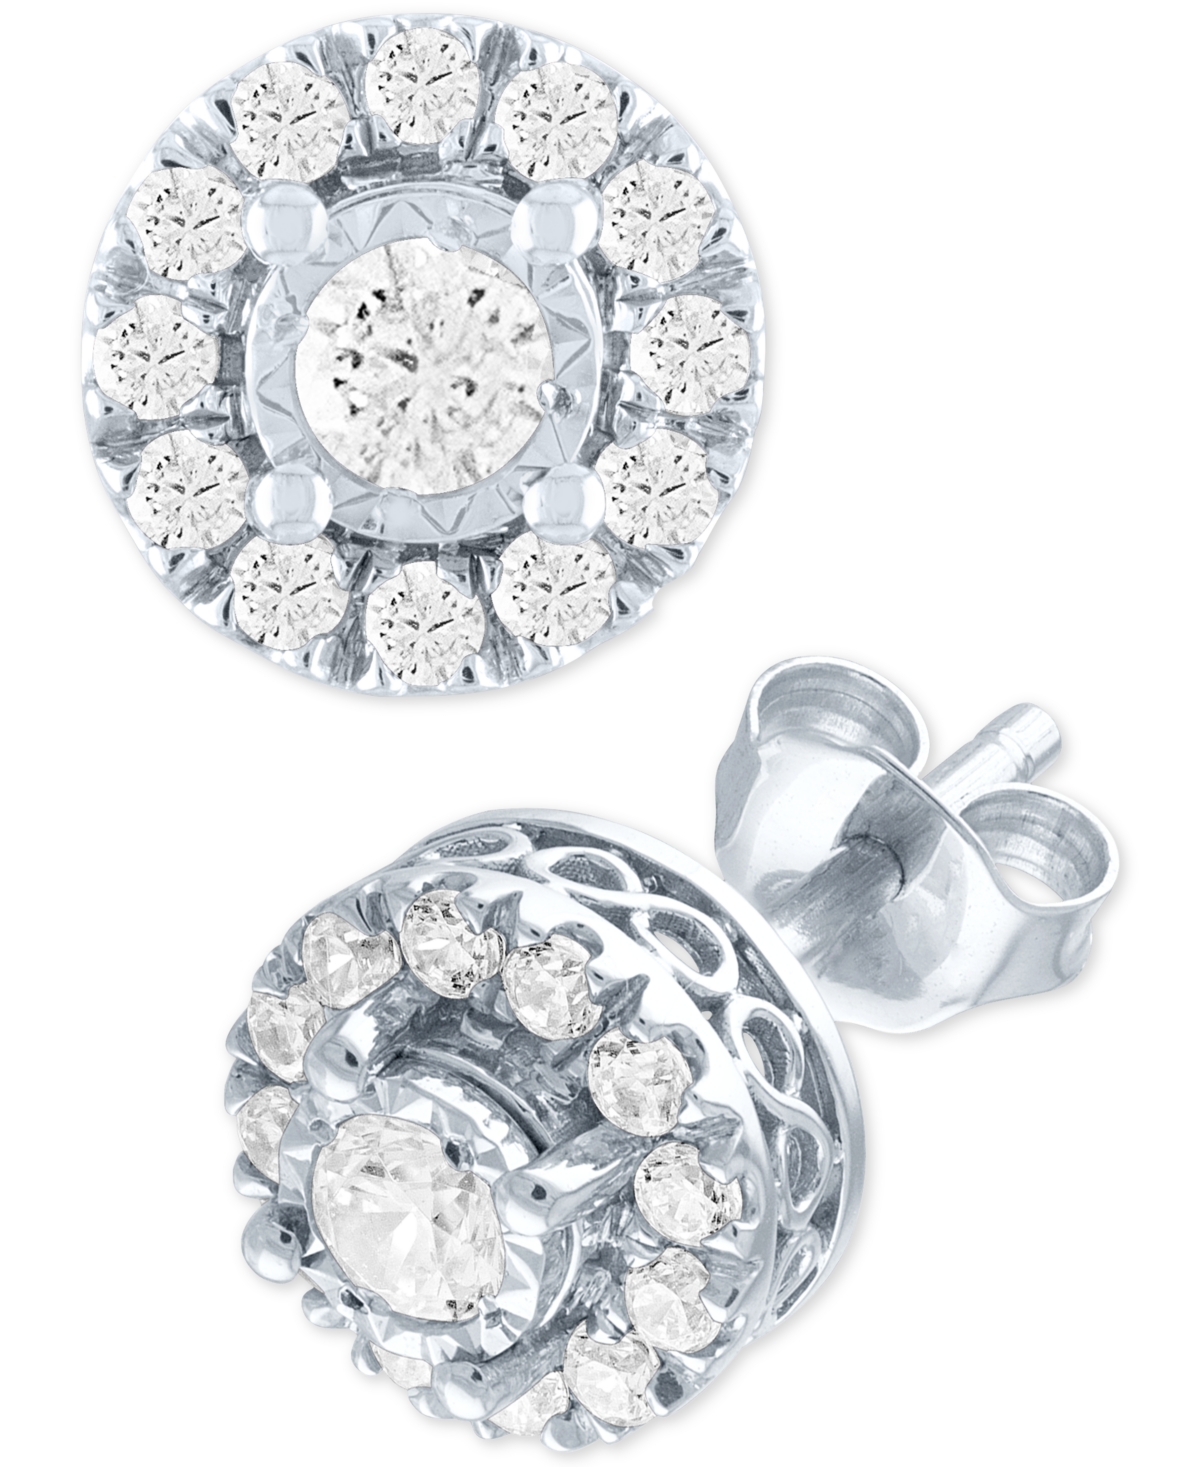 Lab Grown Diamond Cluster Stud Earrings (1/2 ct. t.w.) in Sterling Silver - White Gold